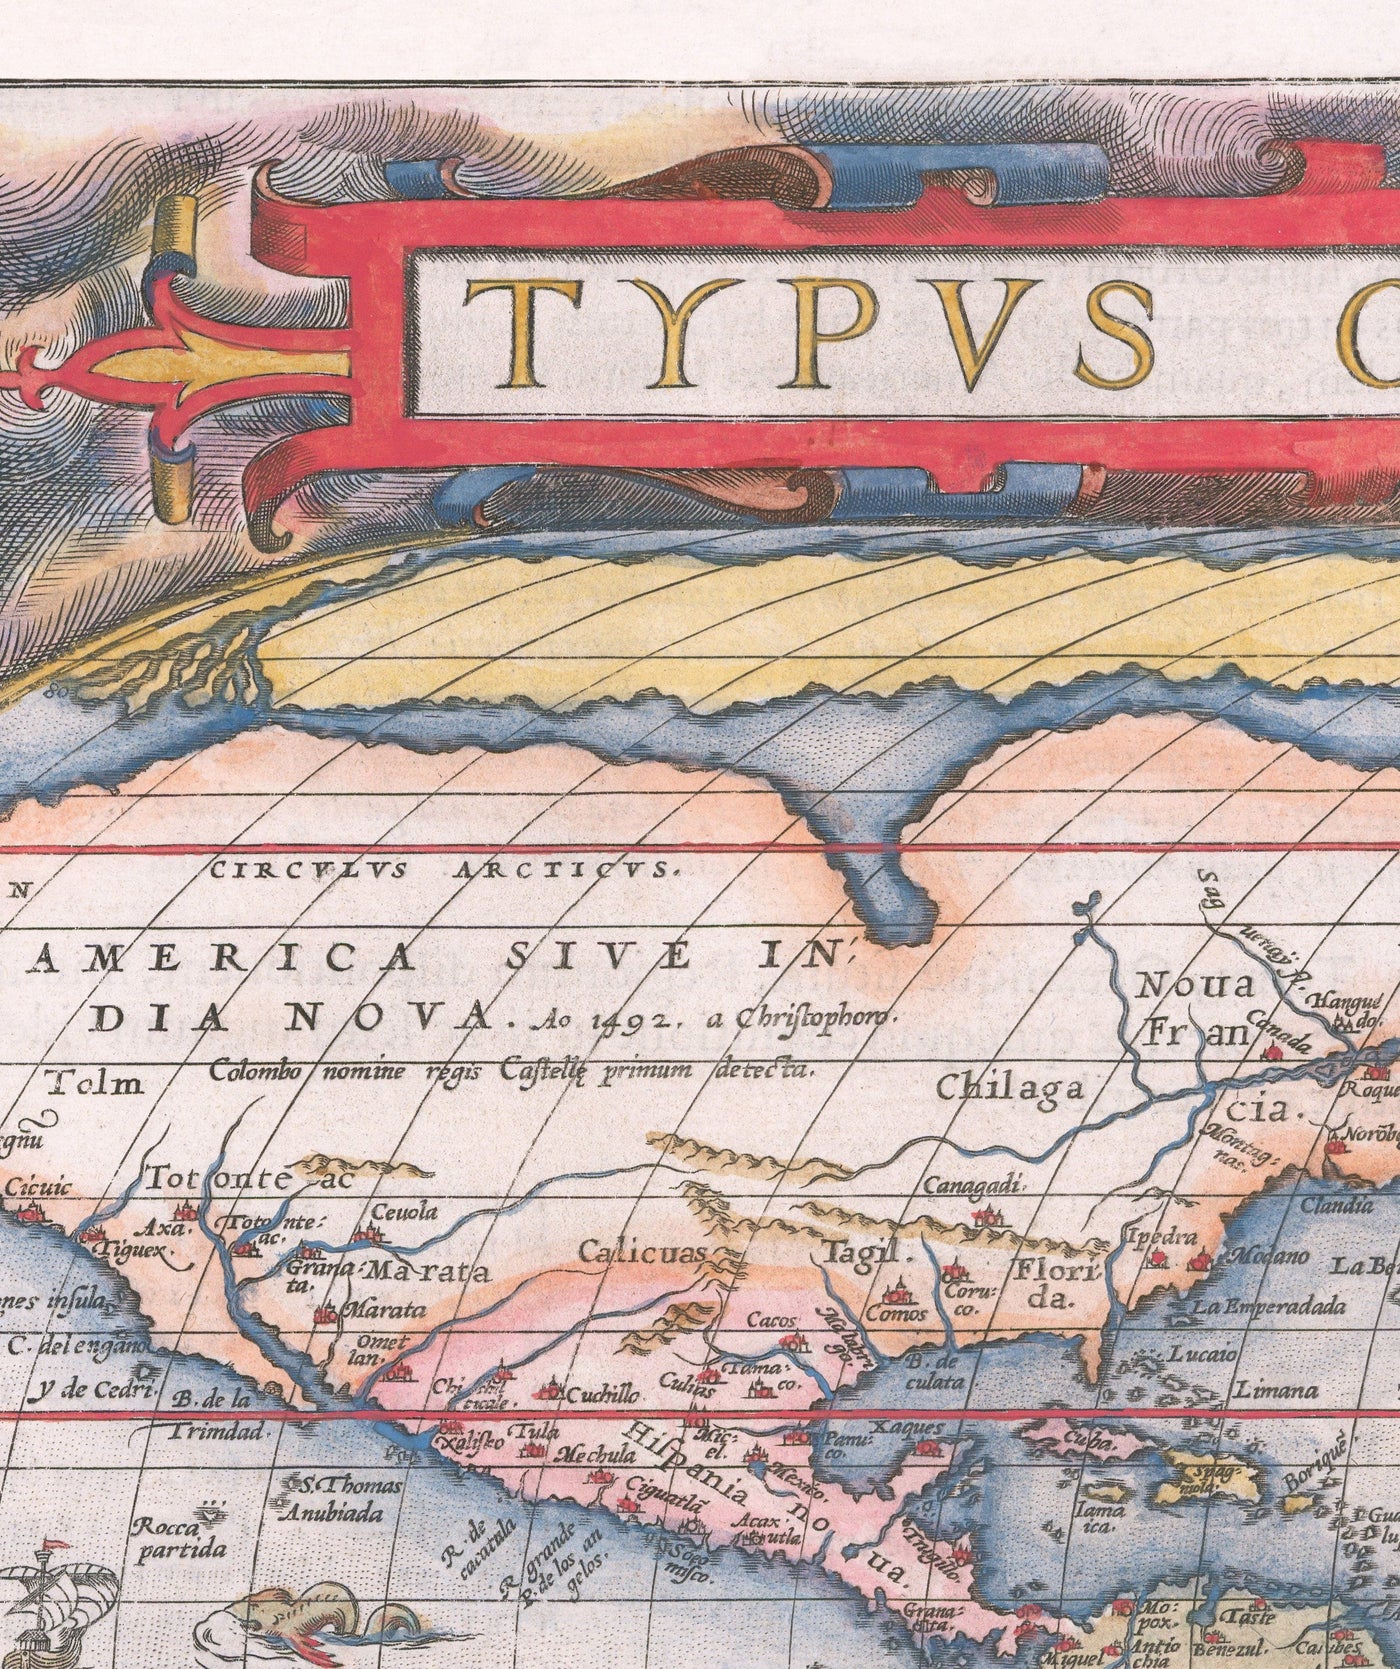 Old World Map, 1570 - The First World Atlas - by Abraham Ortelius